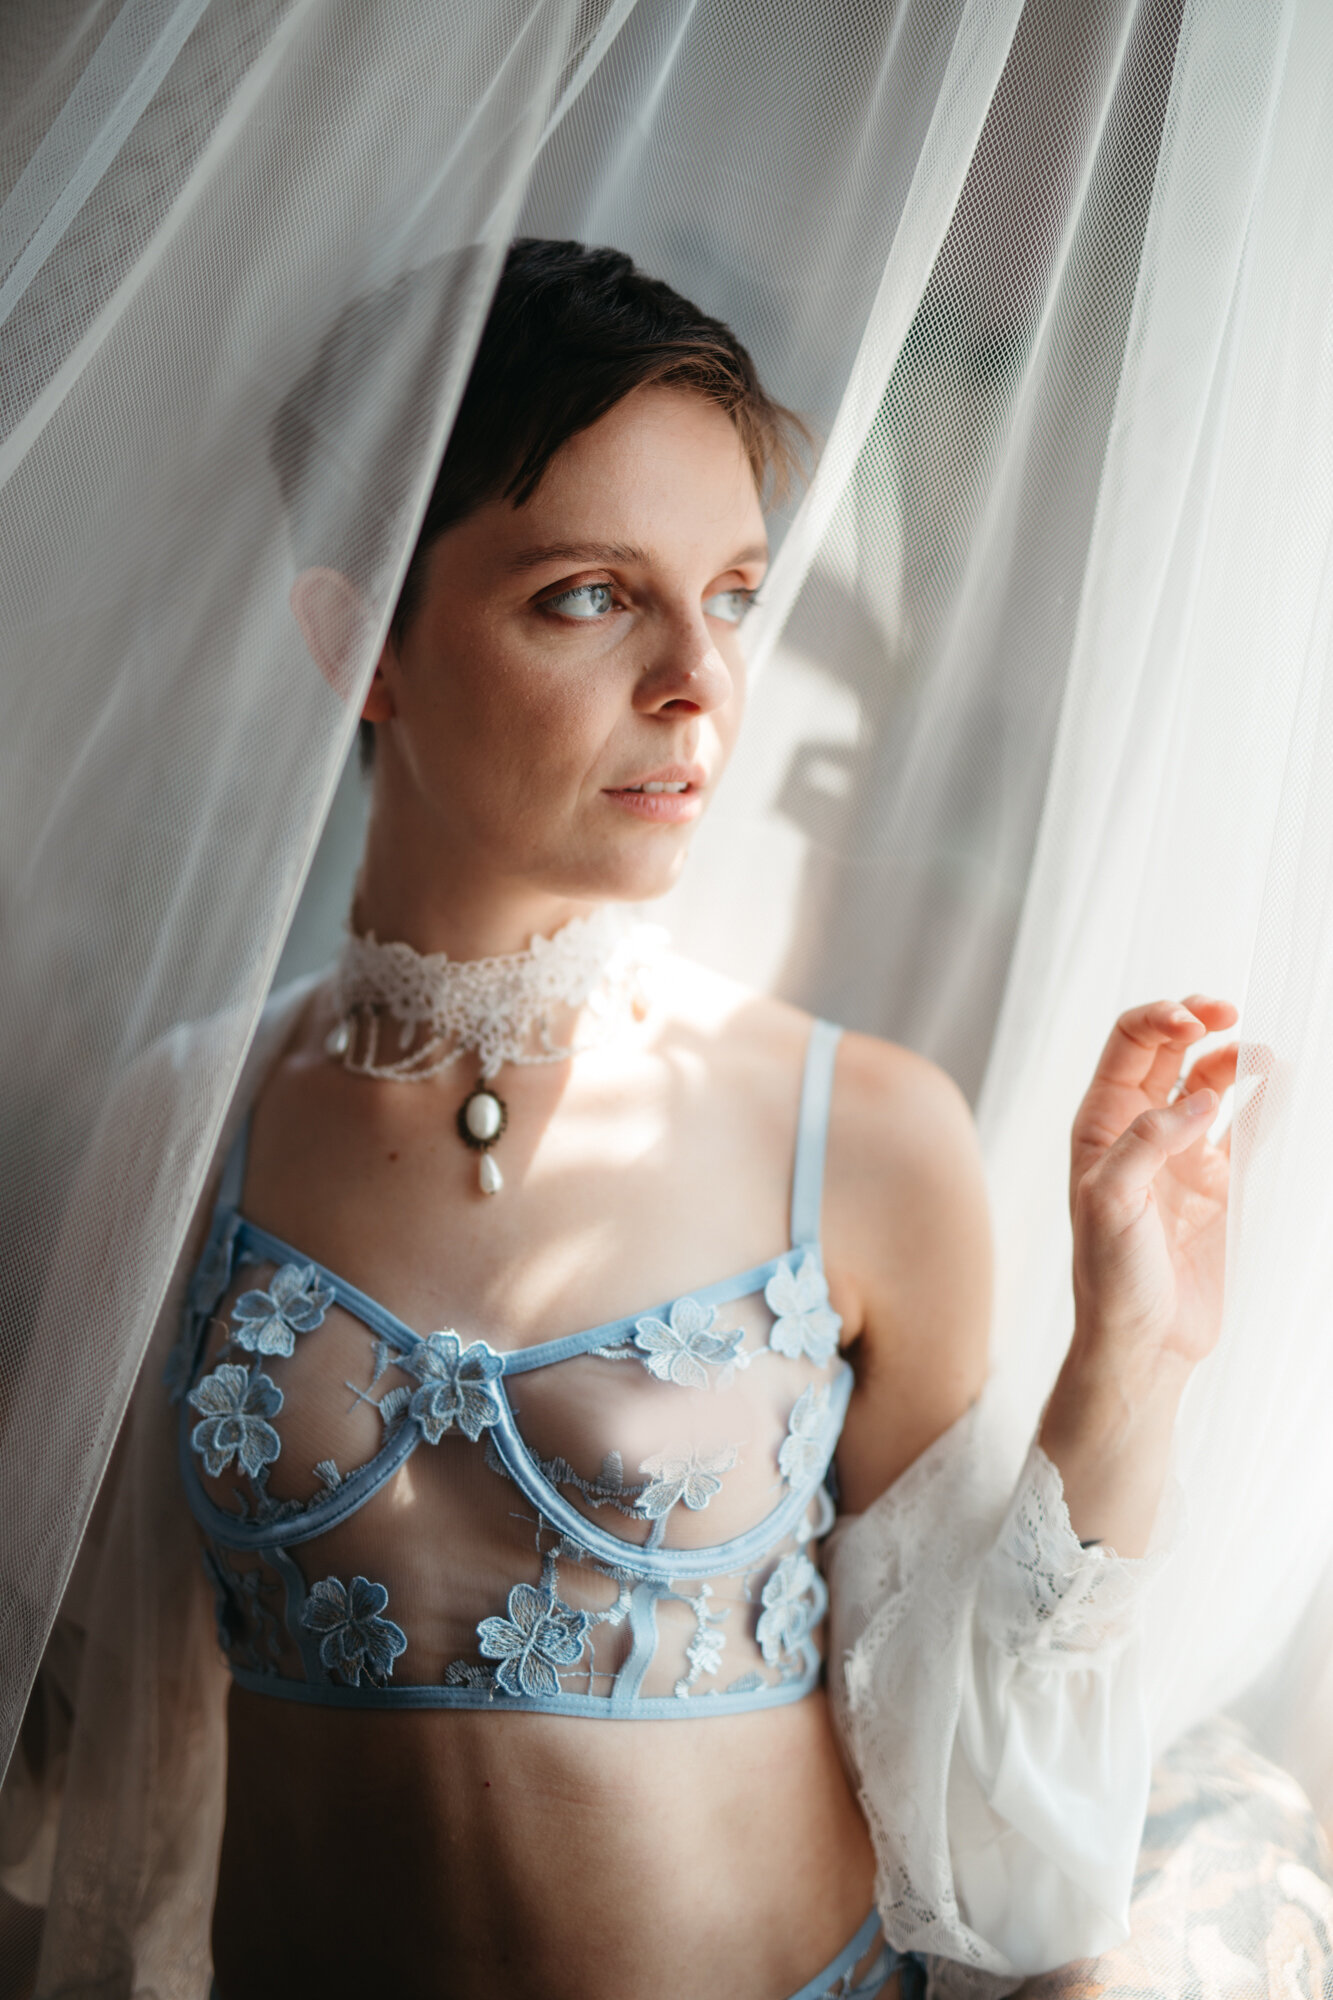 Boudoir photo of a person with short brown hair looking out of a window